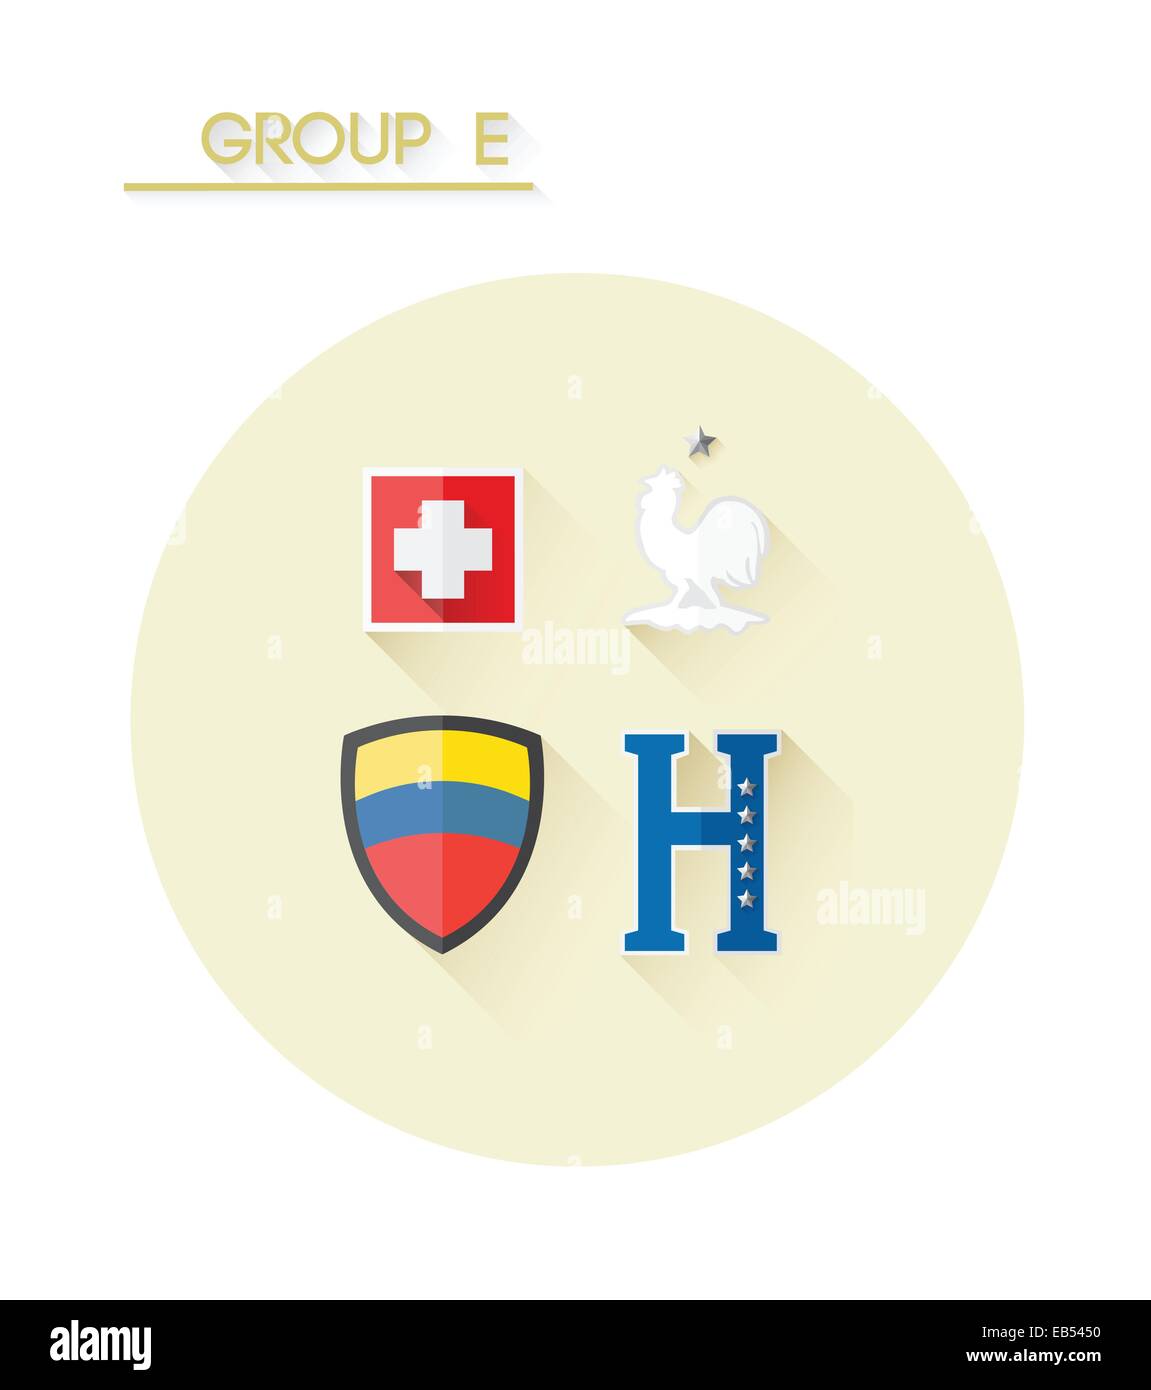 Group e with country crests Stock Vector